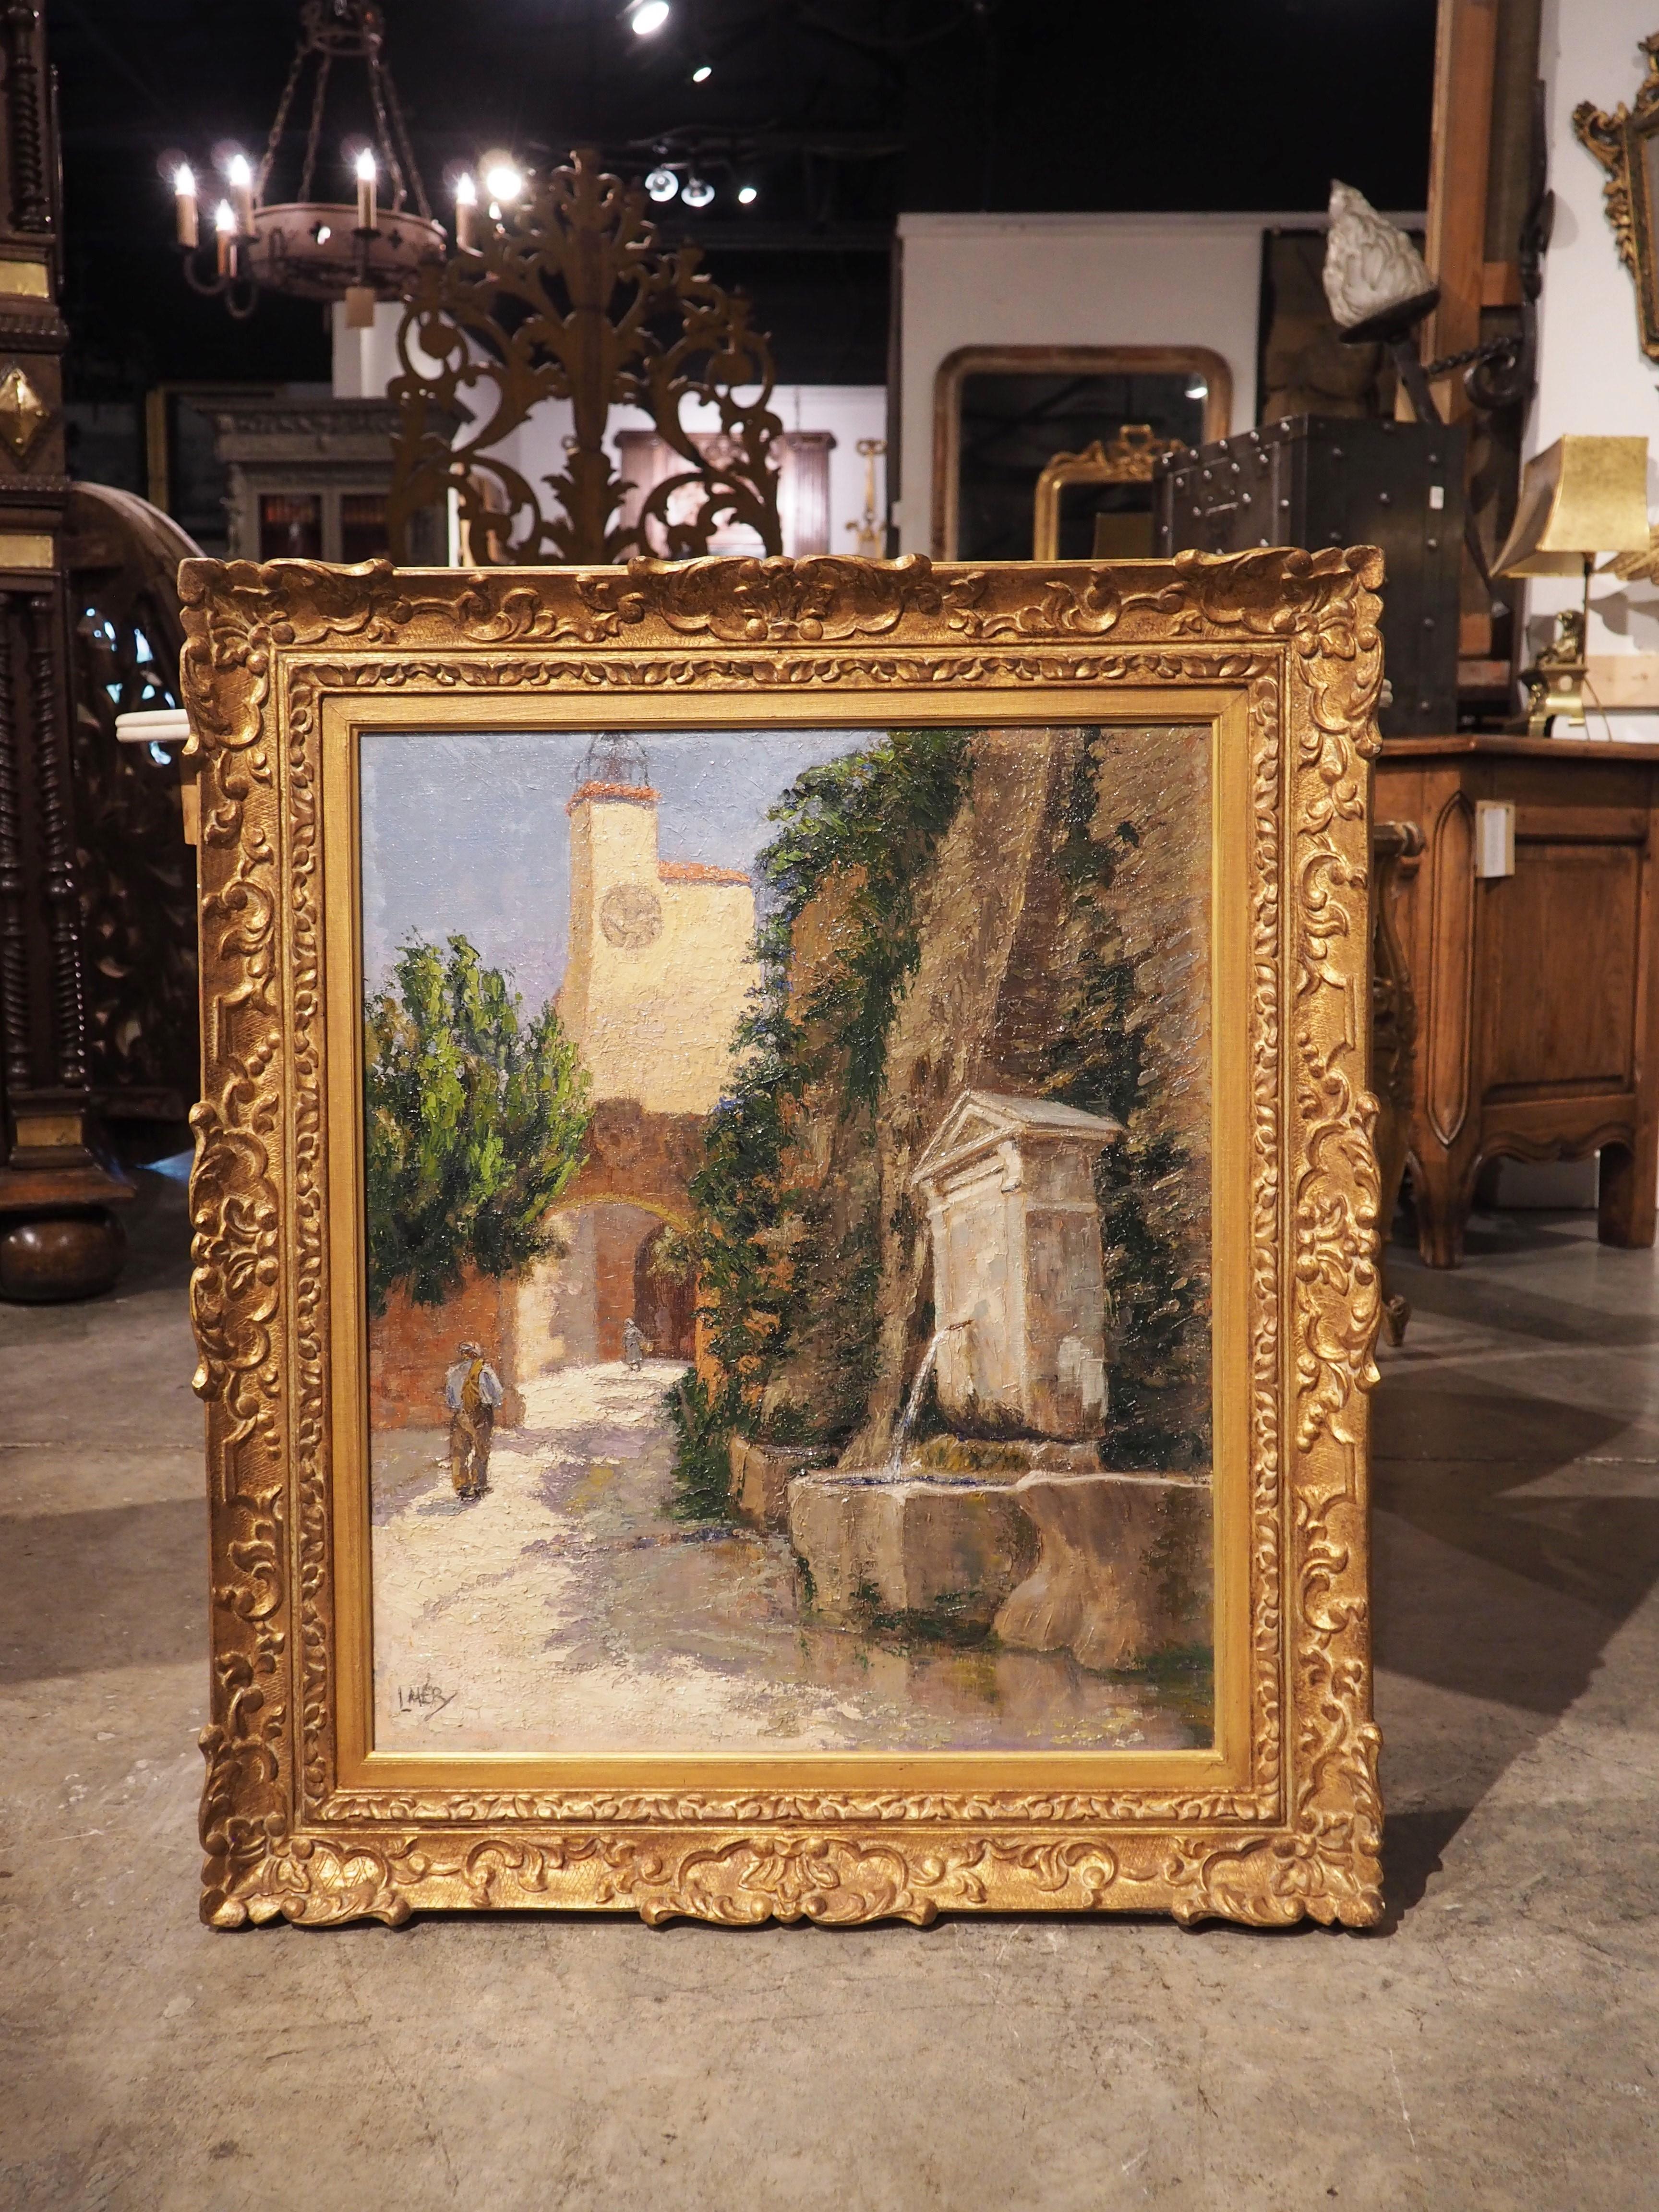 Signed in the lower left corner of the canvas by the artist, L. Mery, this vibrant painting depicts a street fountain in Provence, France. The verso side has also been inscribed, although the paint is too faint to discern. A stone wall fountain with